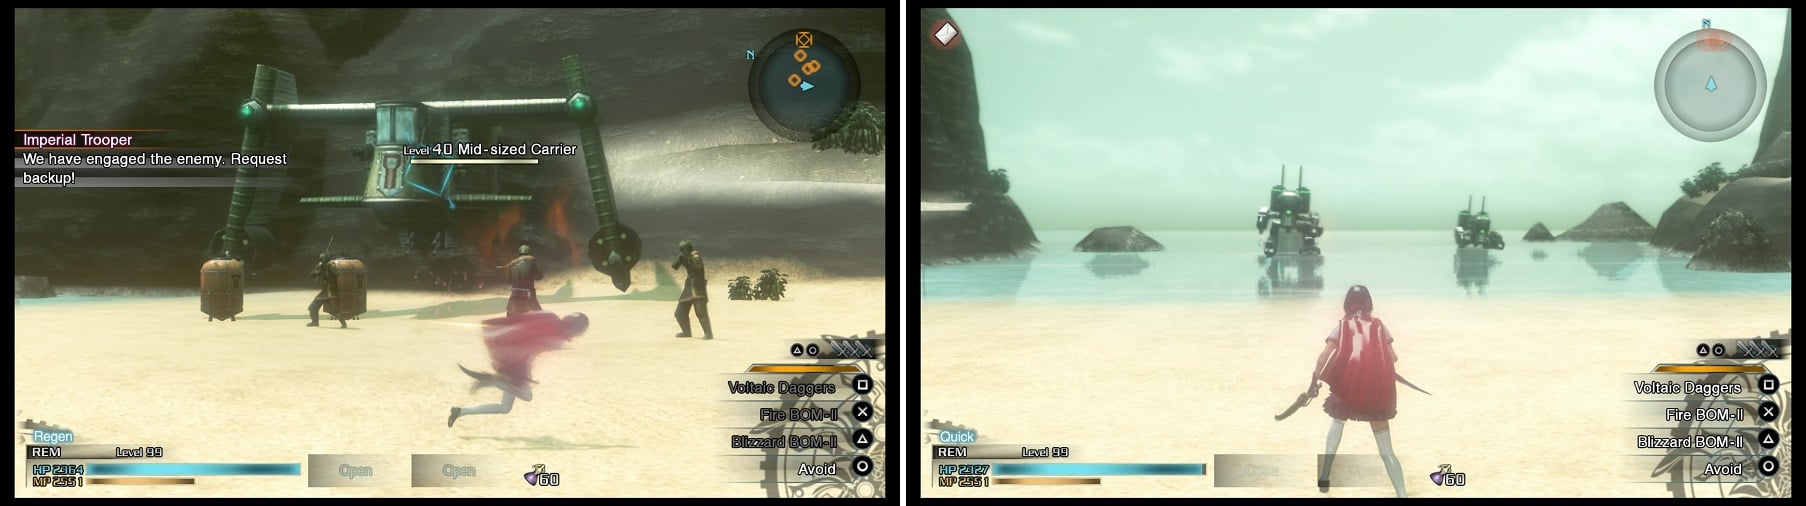 If you want to S-Rank this mission, you'll need to destroy the Carrier (left) and harvest its Phantoma. The enemies coming out of the water are just normal Colossi, despite having a different name (right).